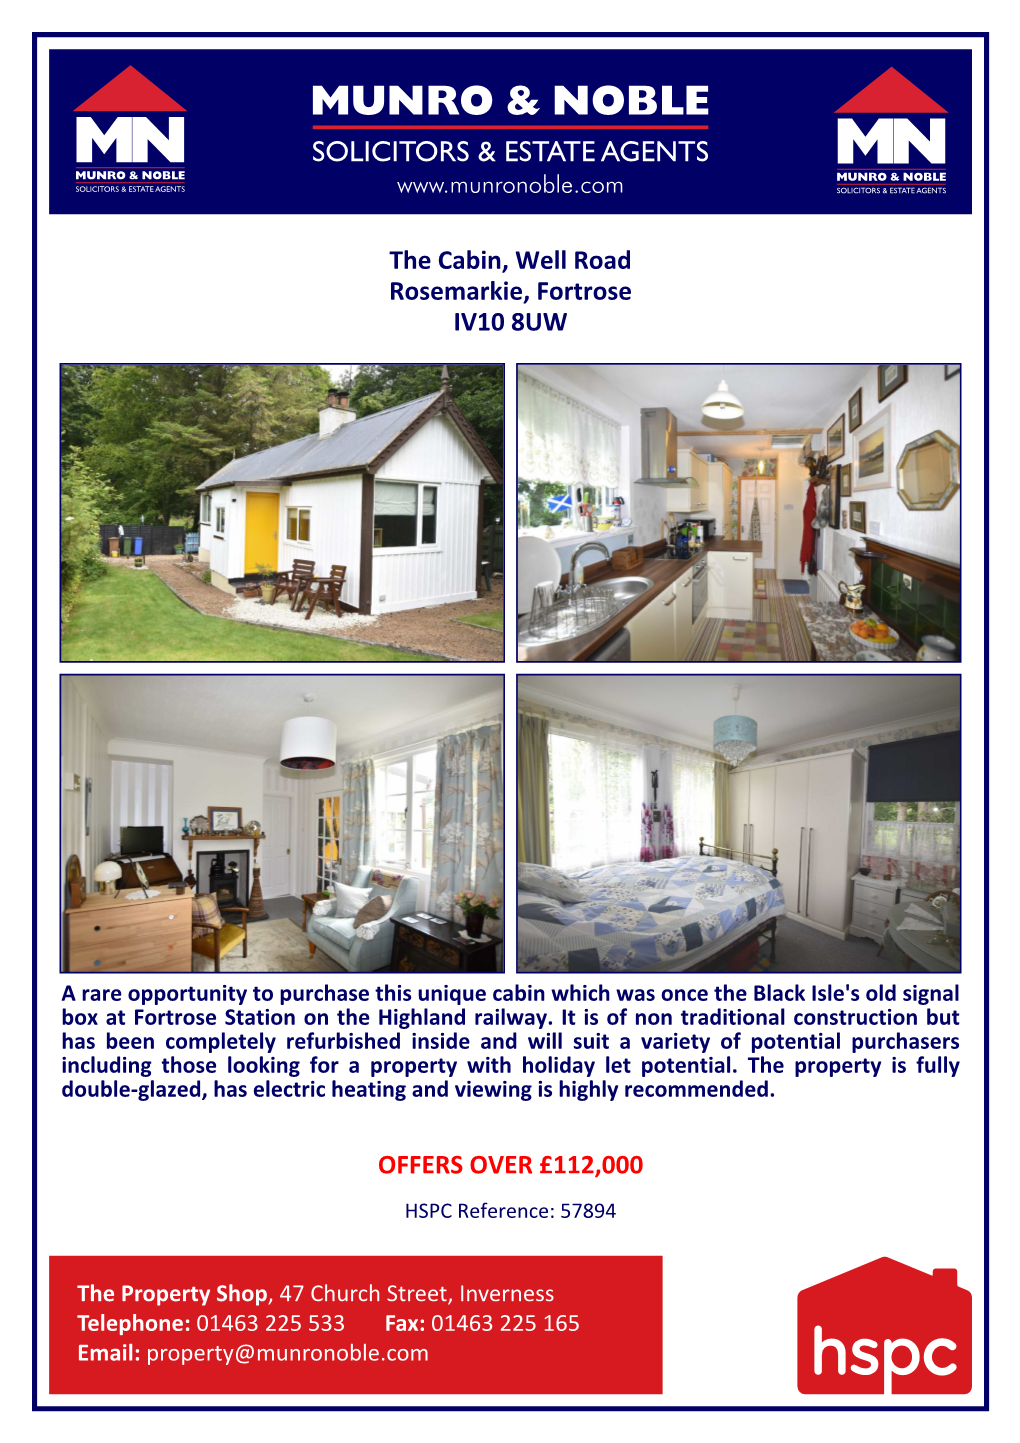 The Cabin, Well Road Rosemarkie, Fortrose IV10 8UW OFFERS OVER